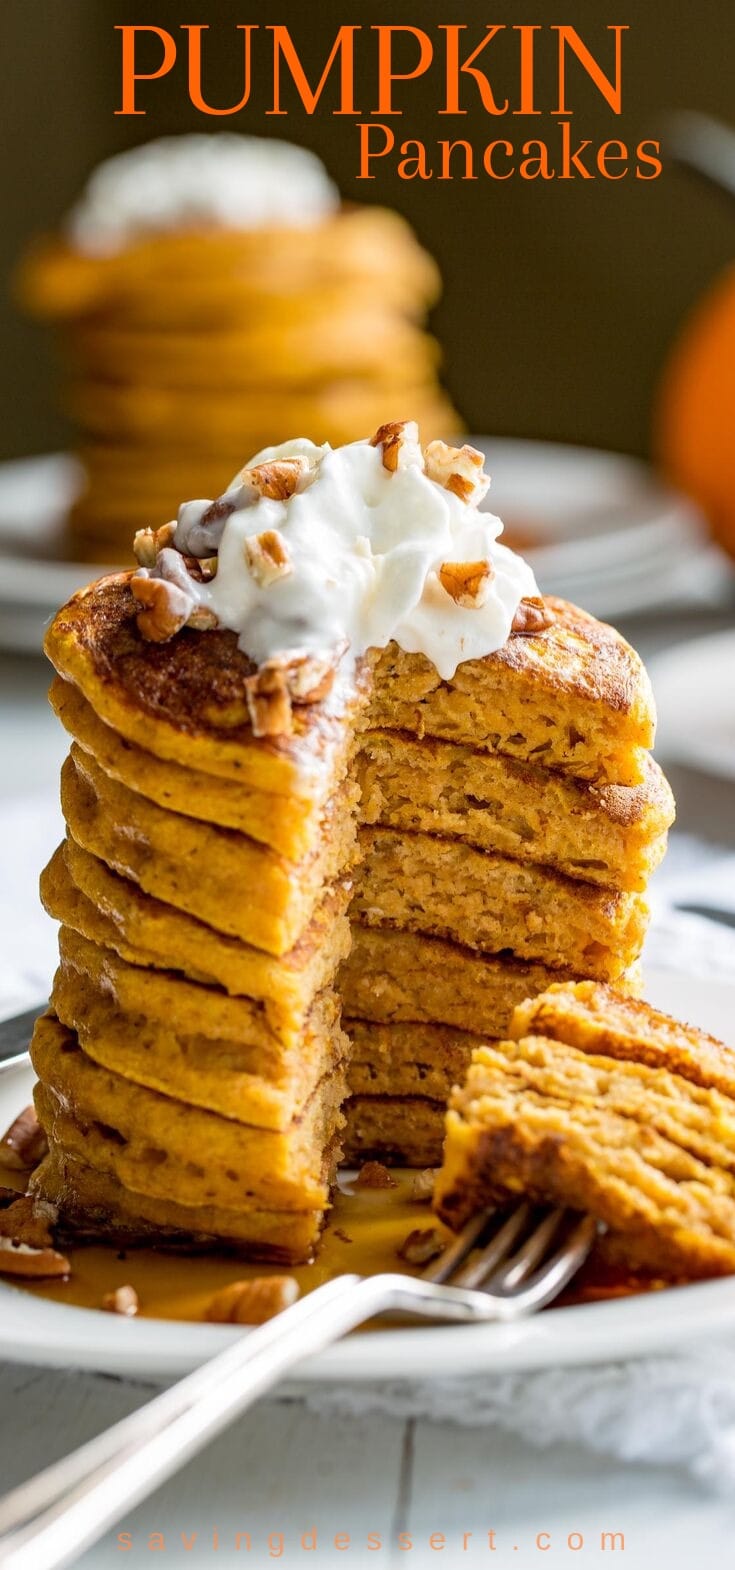 A stack of pumpkin pancakes topped with whipped cream and chopped pecans.